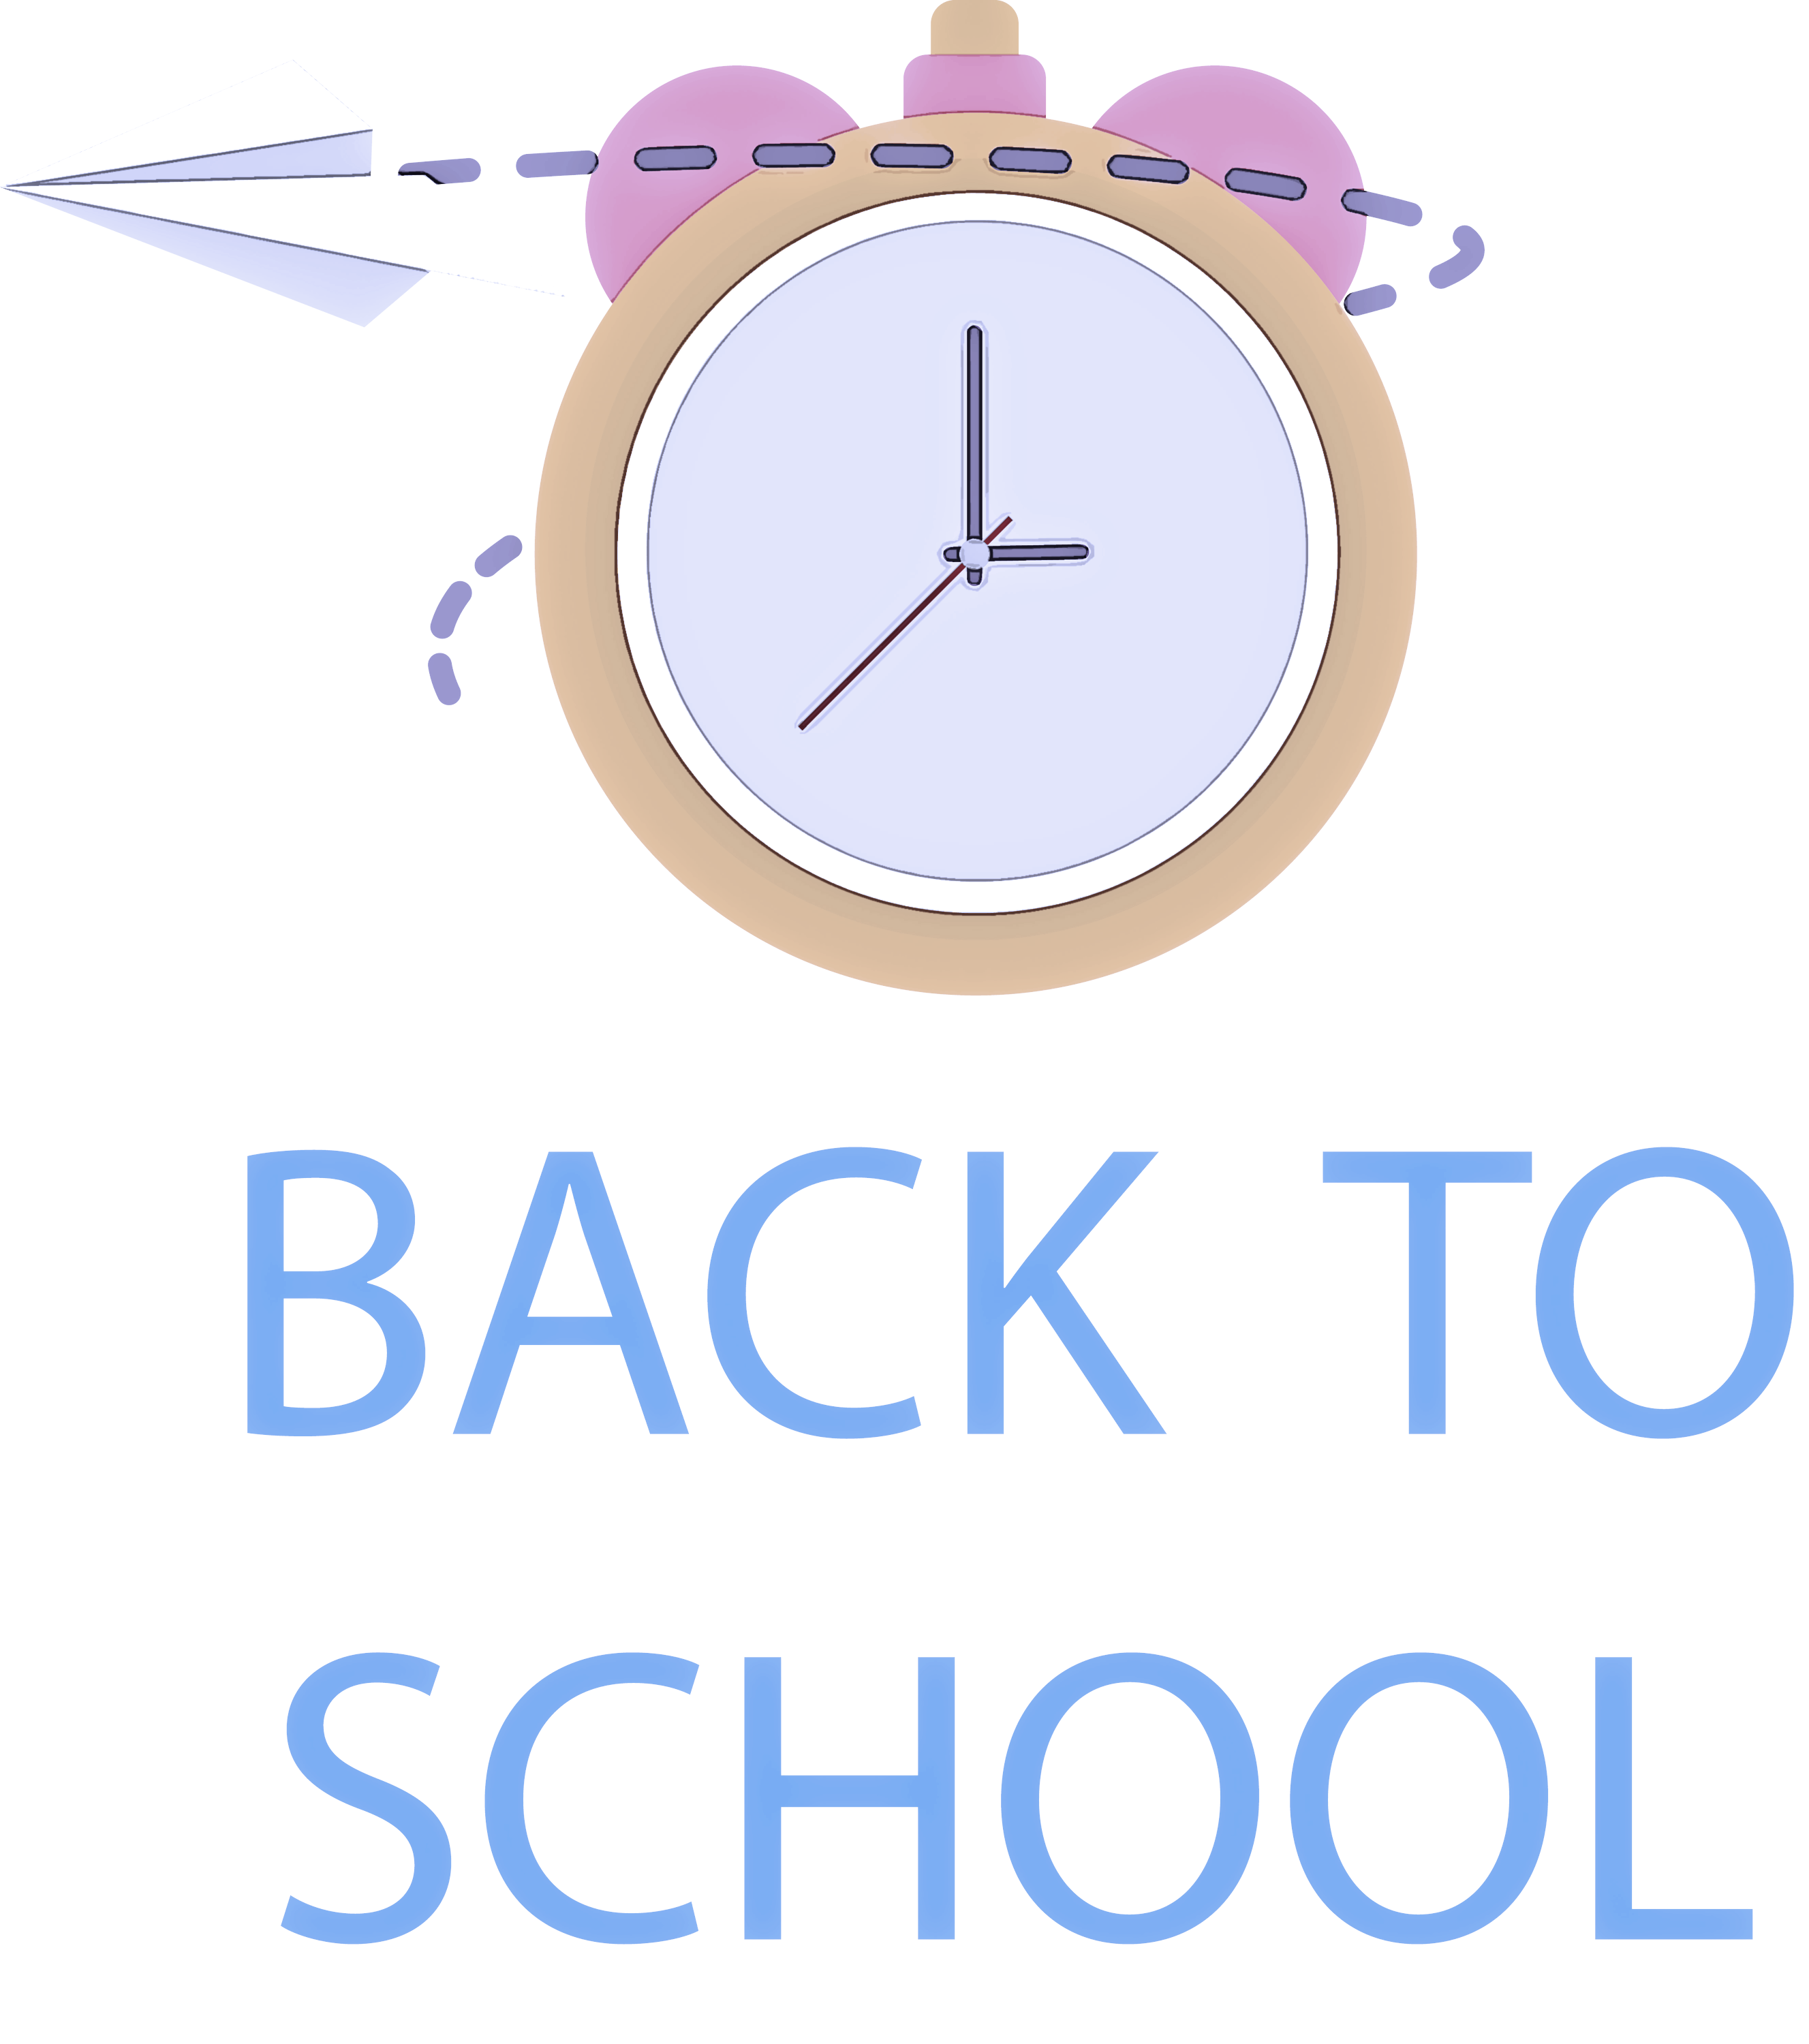 Back to School Clipart